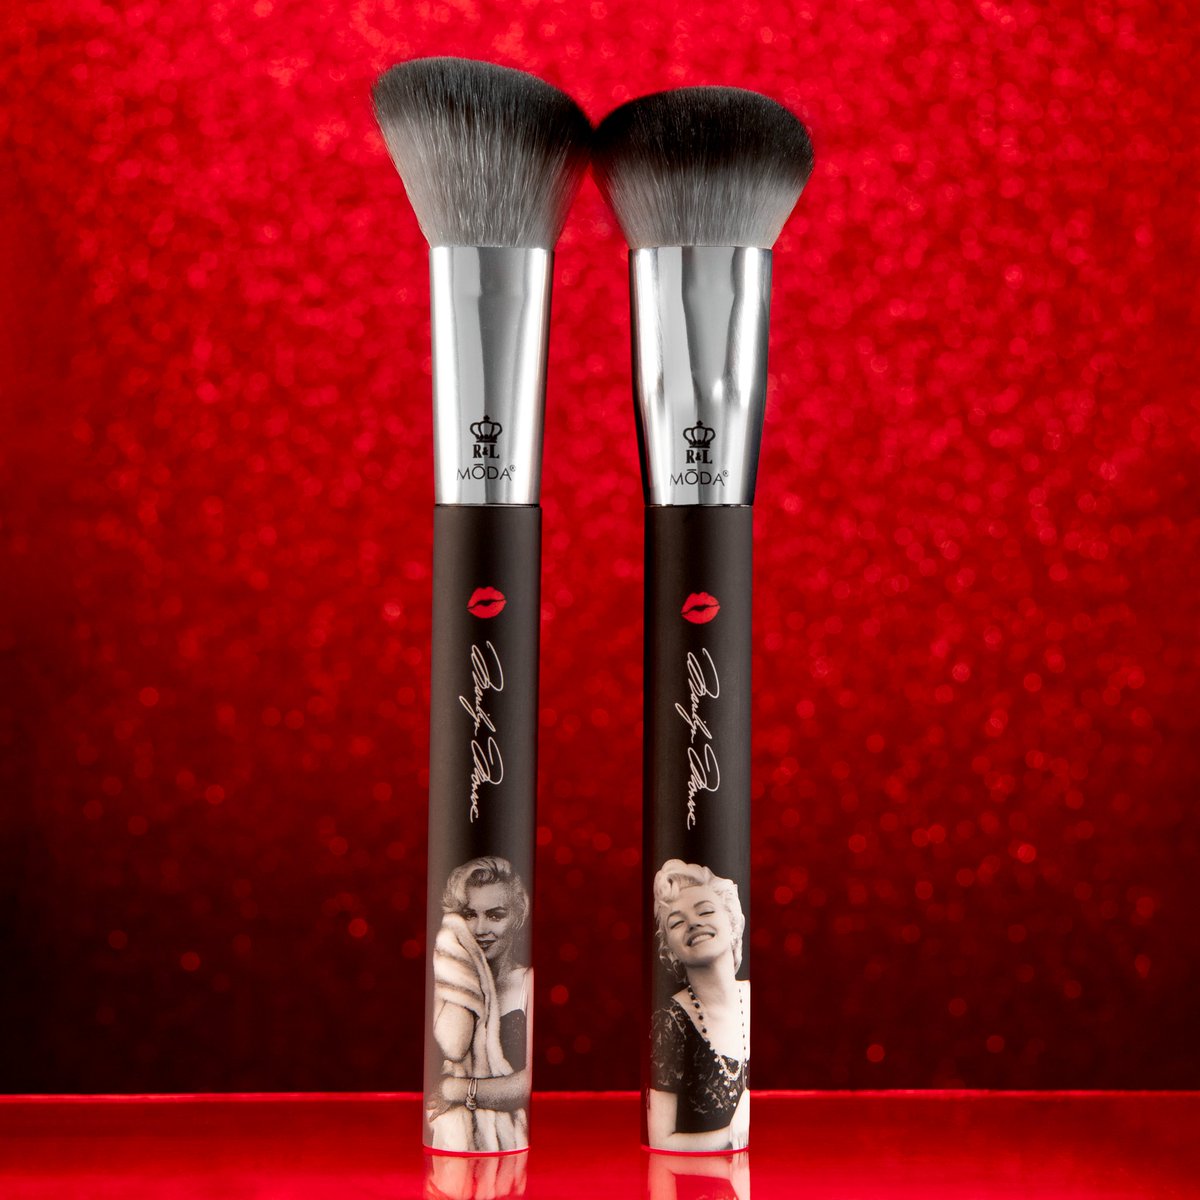 Curious about how to use the brushes in the Marilyn Monroe x @modabrush Big-Time Bombshell Duo? Don't worry we've gotcha! 💋✨ Check it out here: bit.ly/3wEyKjs Shop set here: bit.ly/3TWXDQW